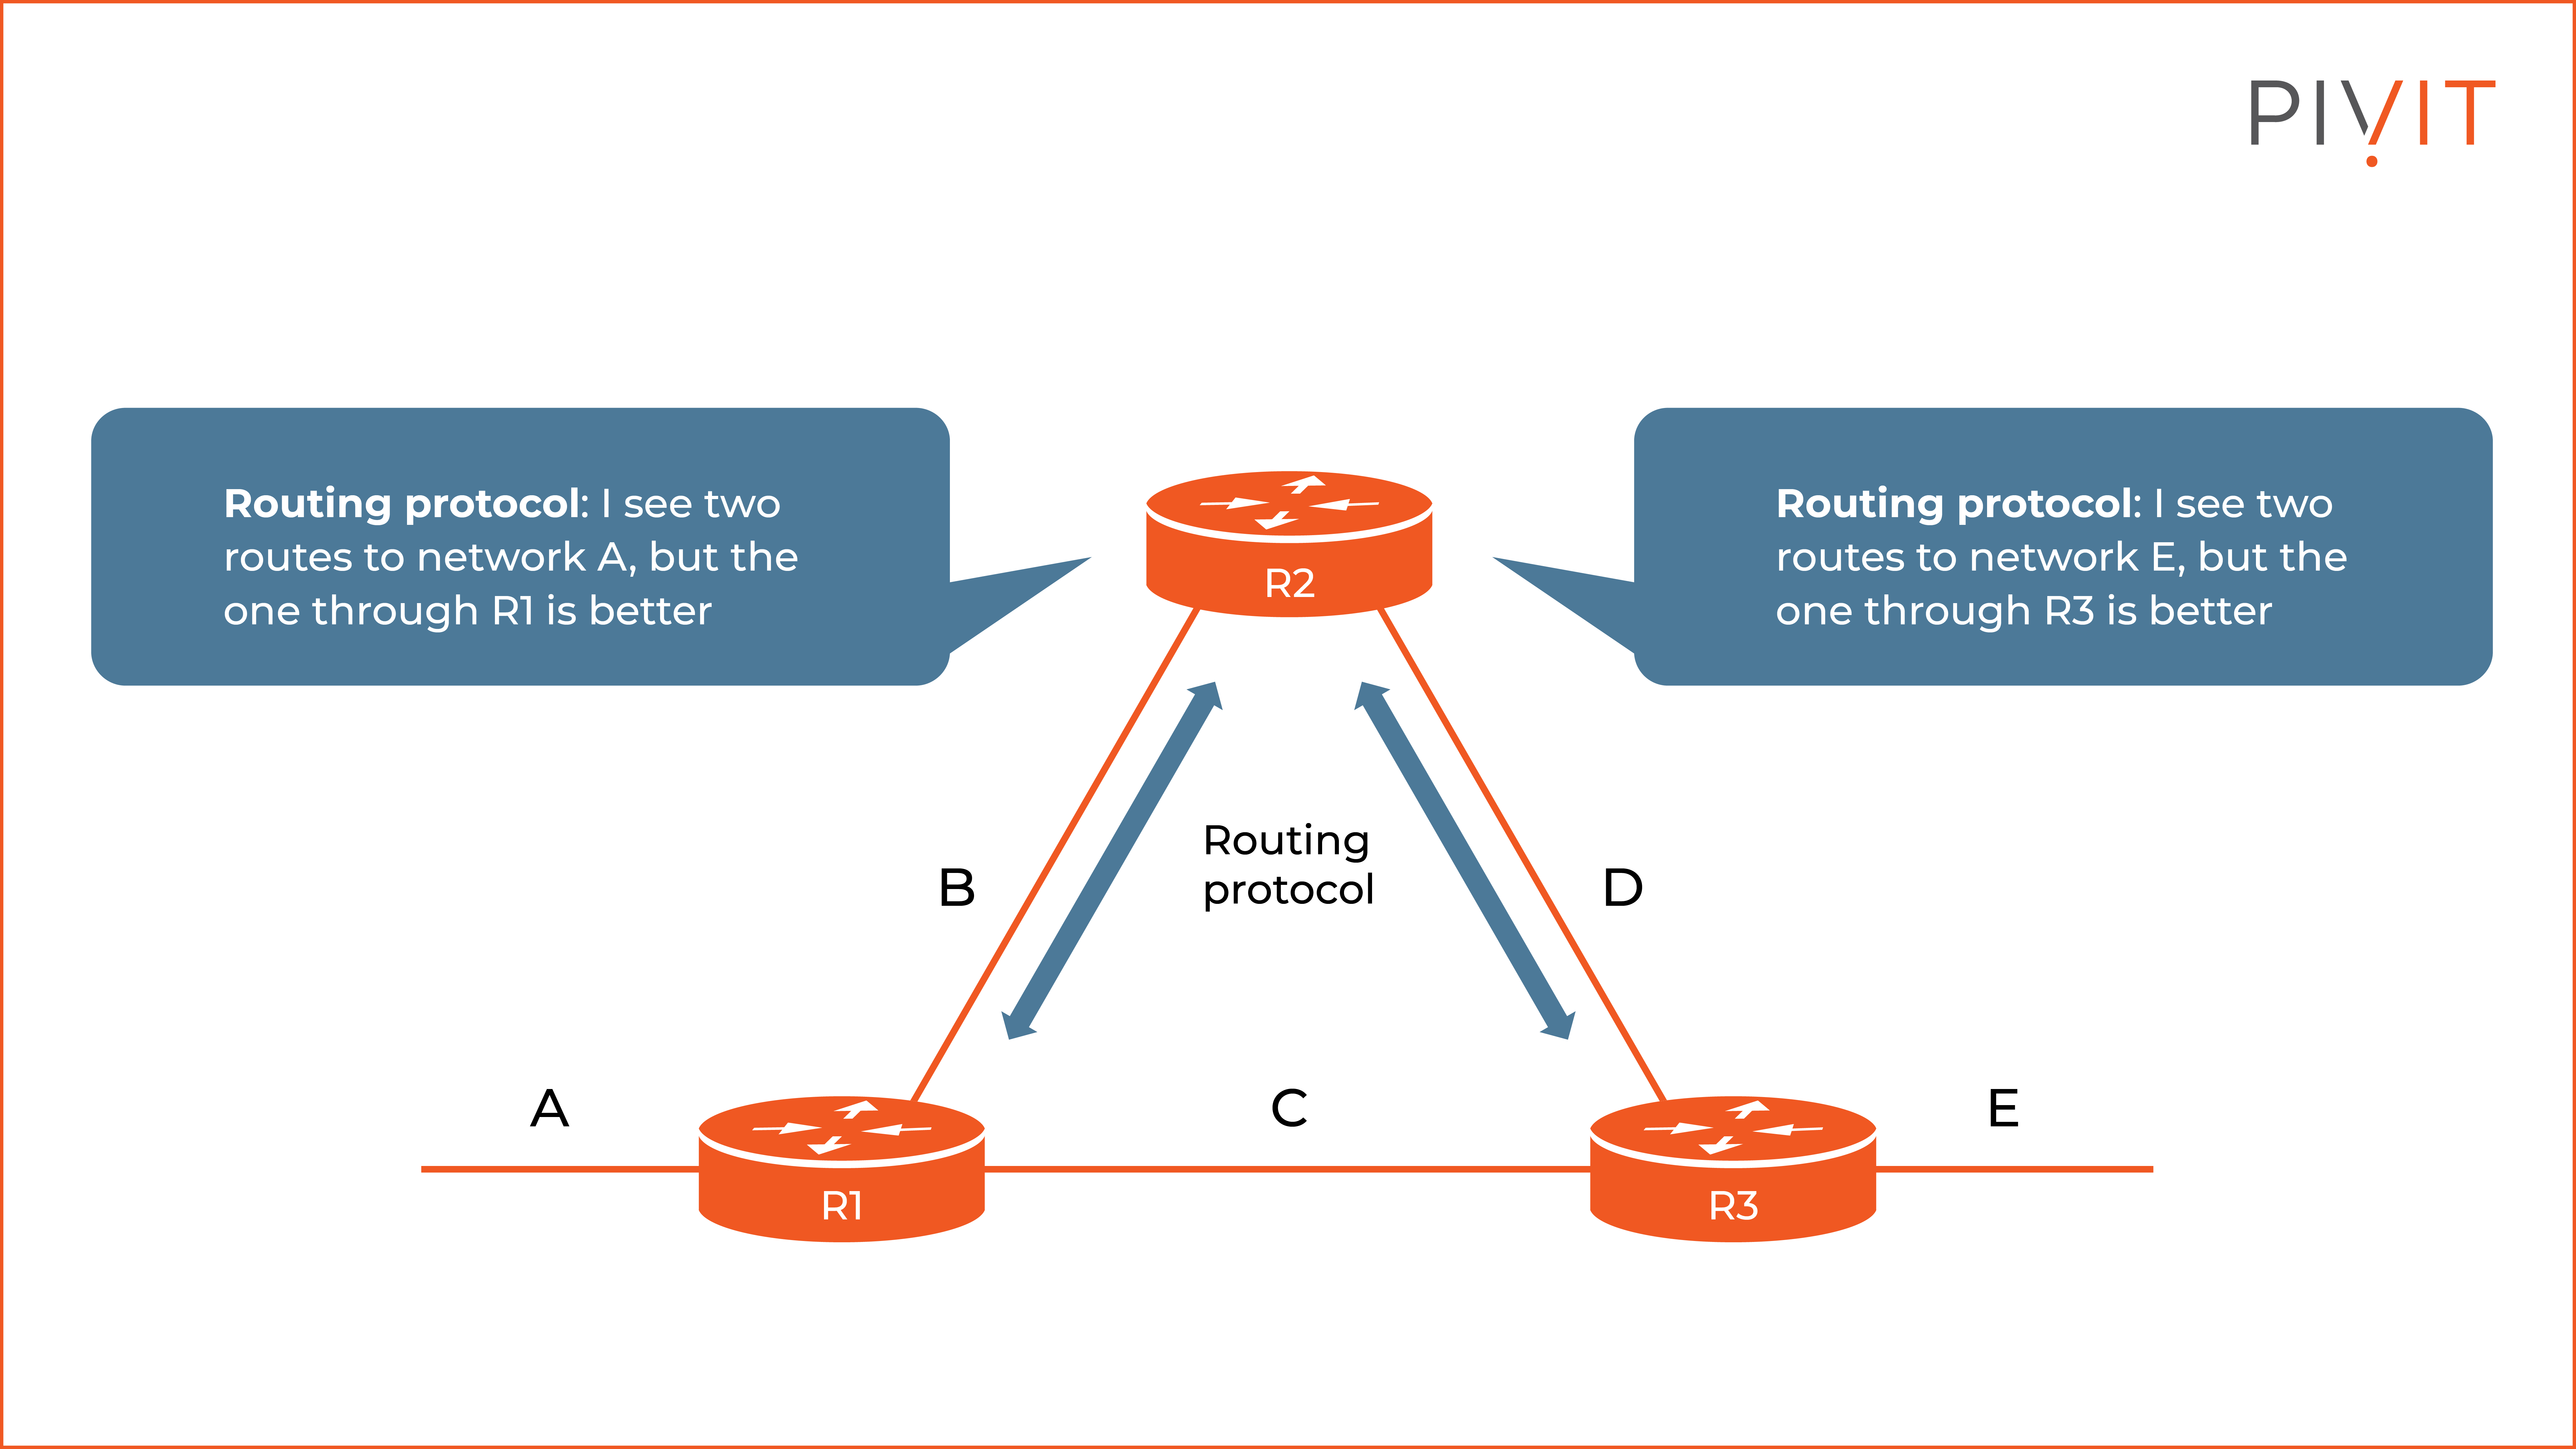 Why is dynamic routing better?